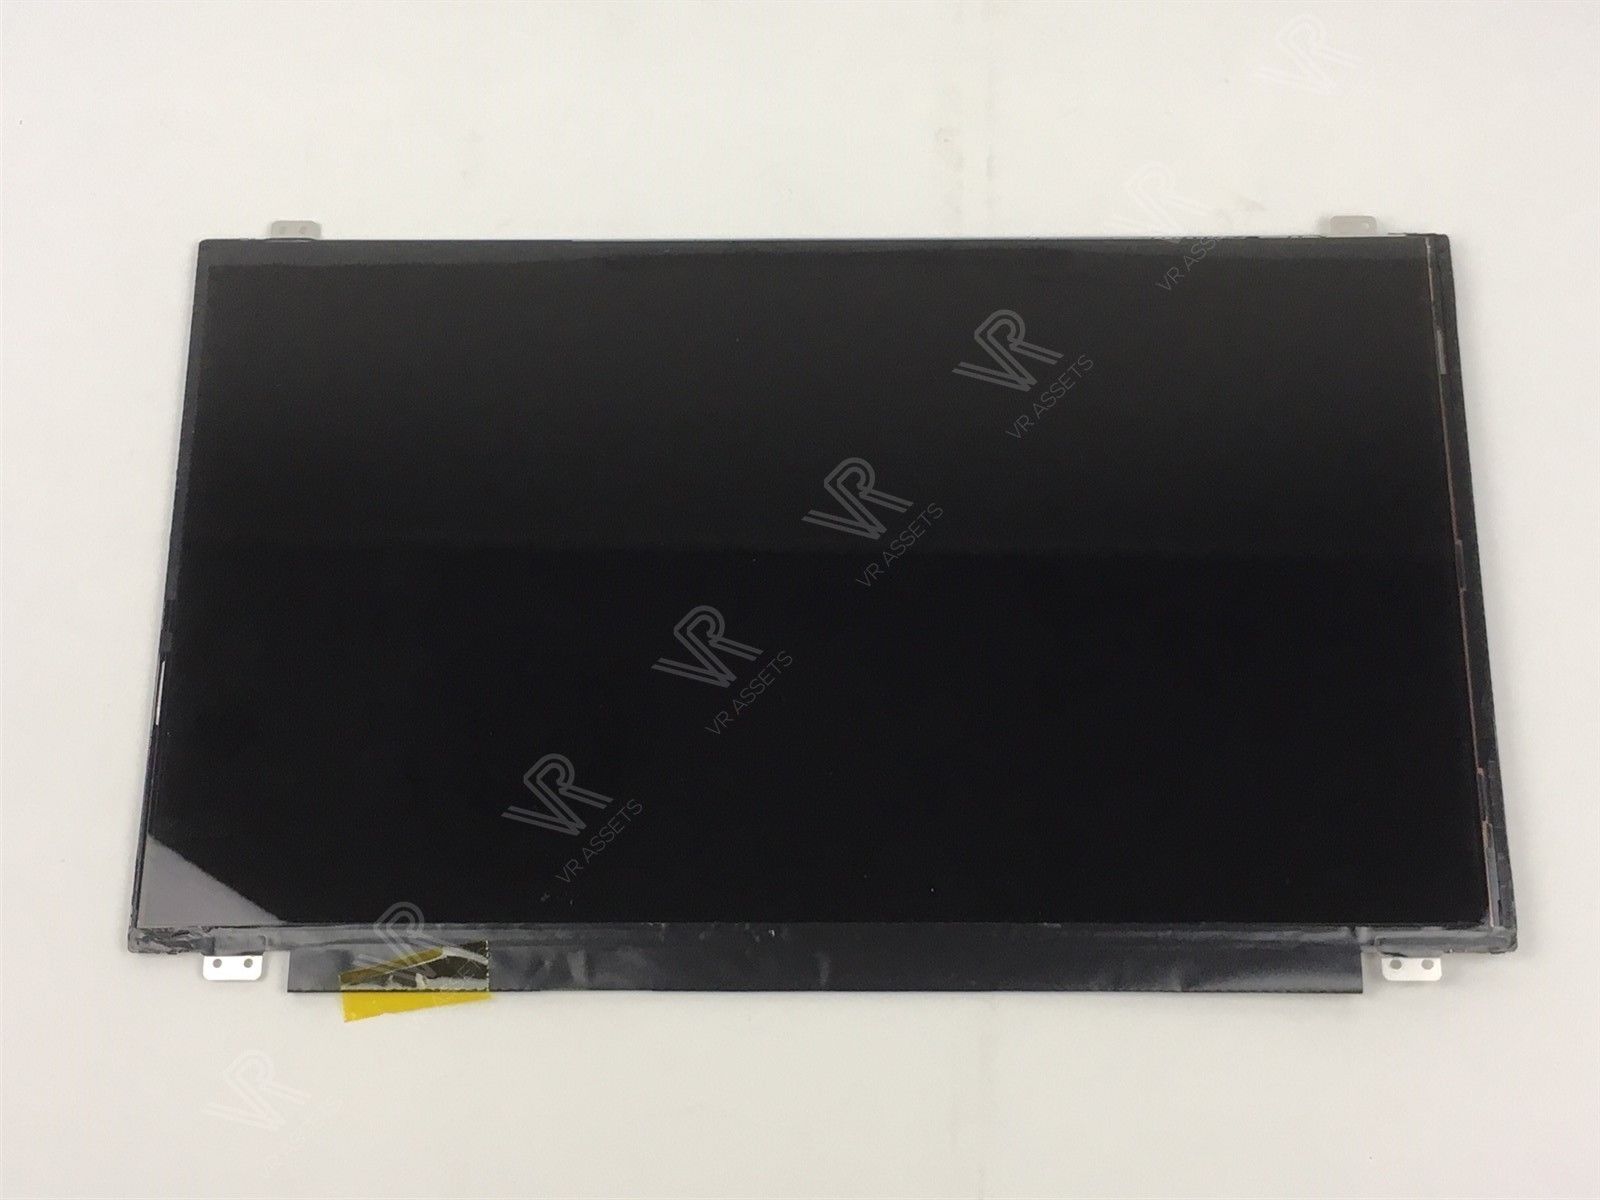 Dell Inspiron 15 5558 15.6" LED LCD Replacement Touchscreen Panel KWH3G 0KWH3G